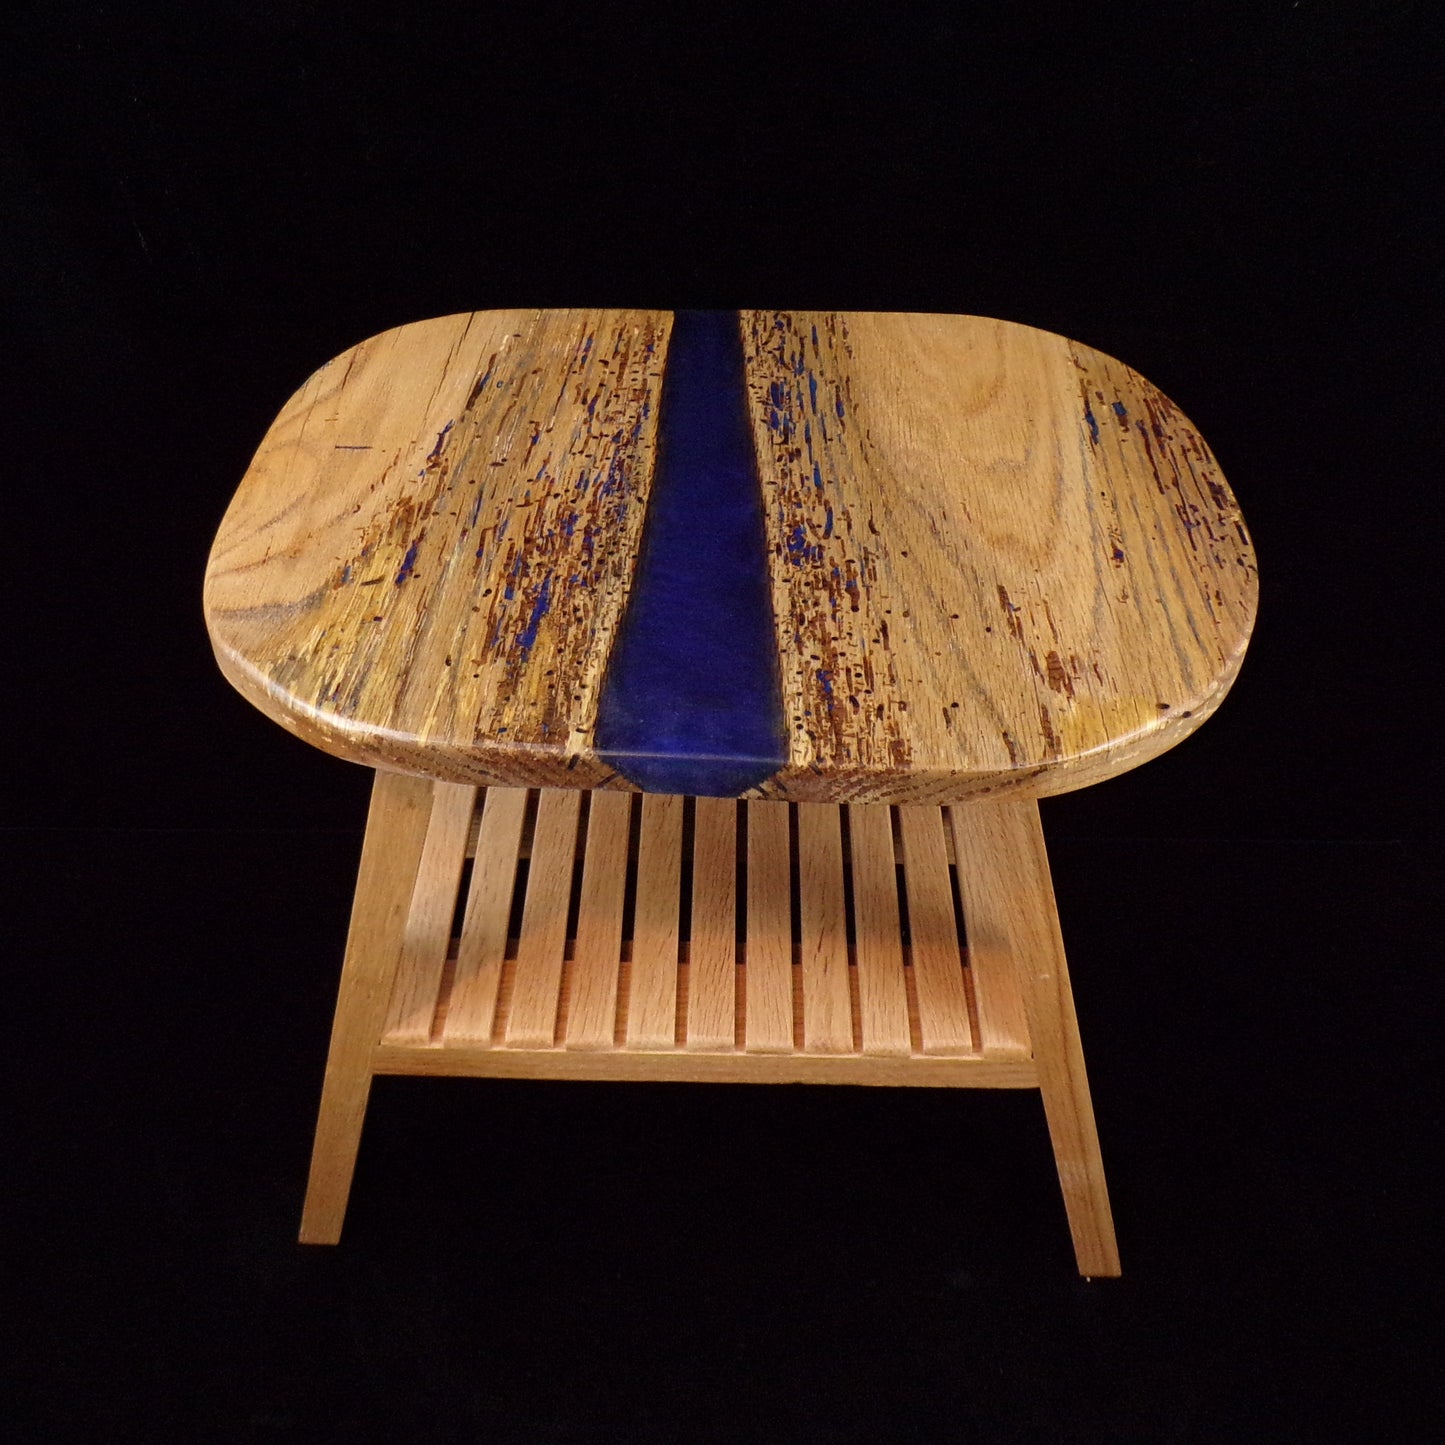 Blue River Wooden Stool with Shelf Under